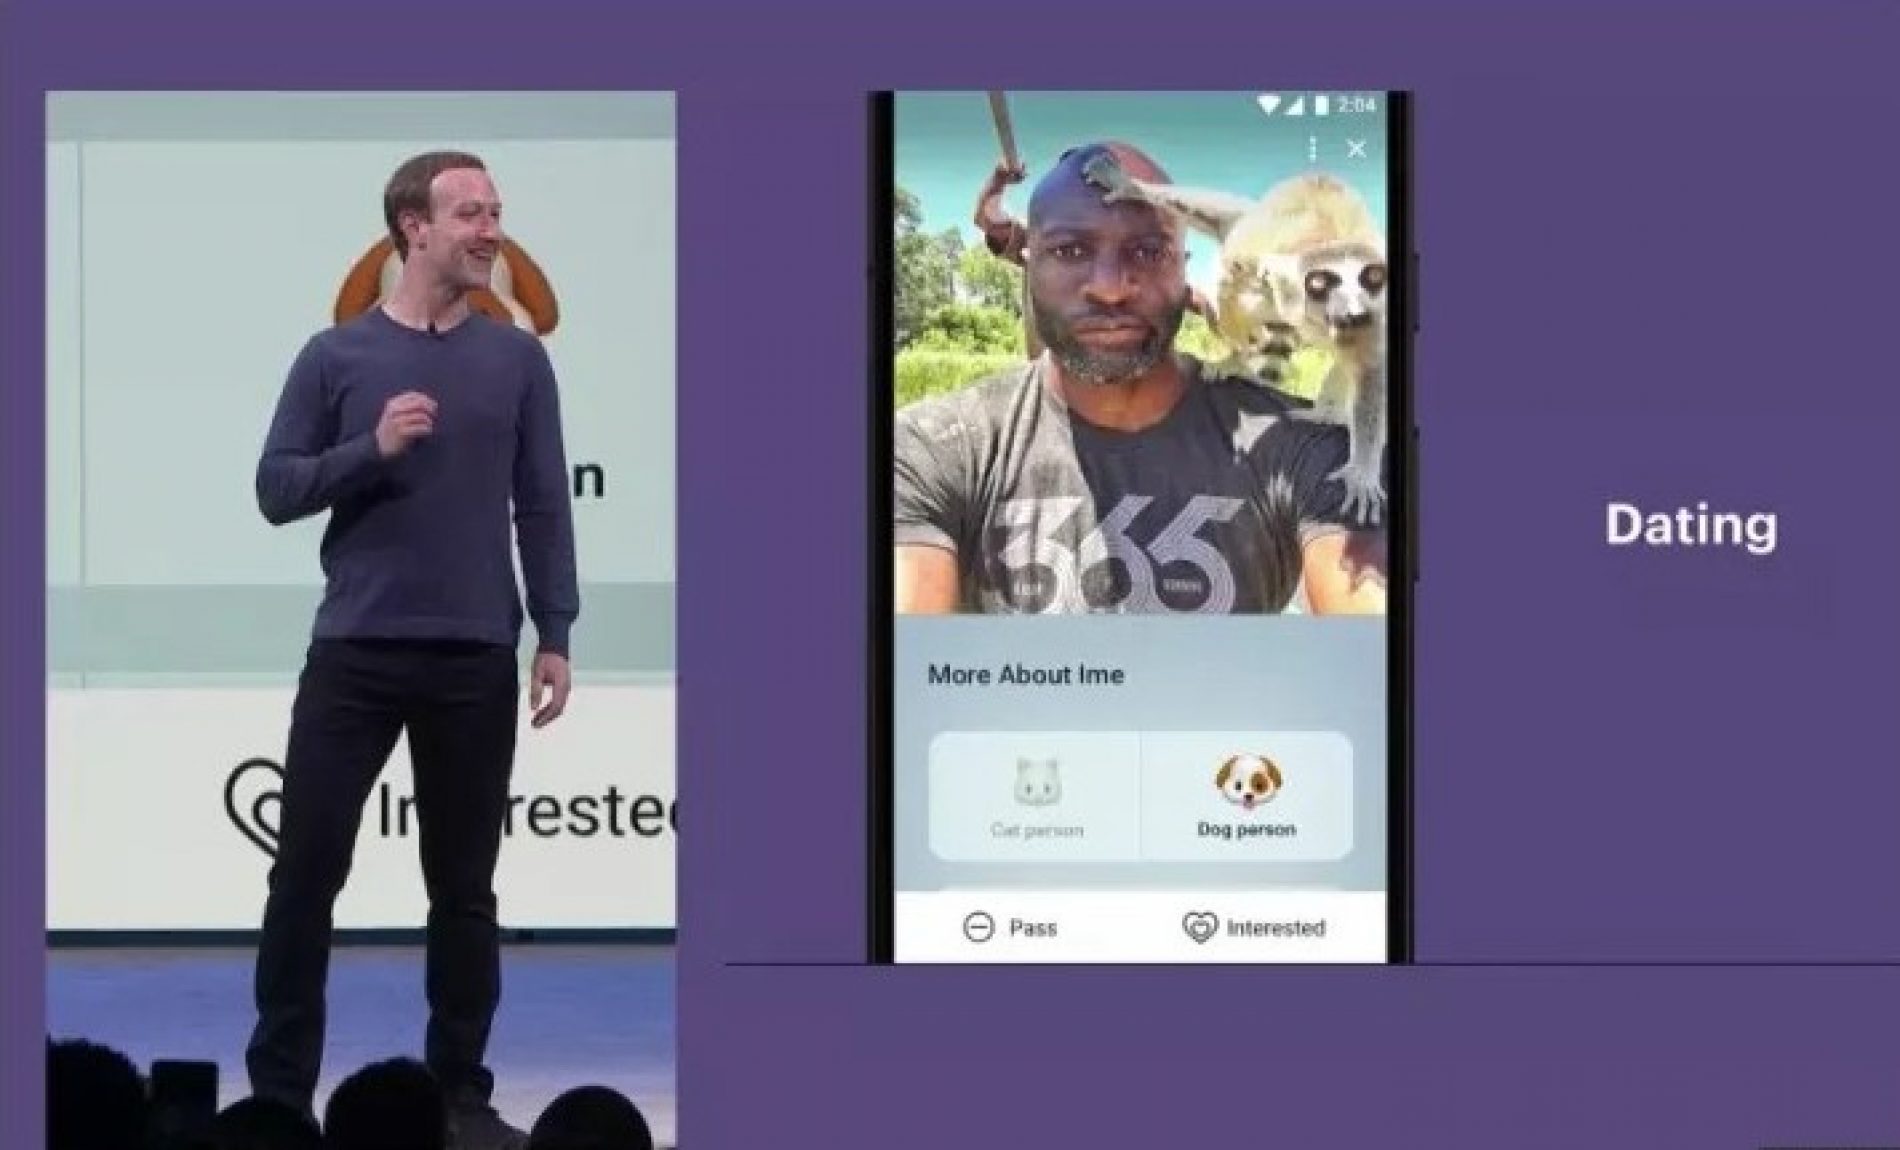 Facebook joins Grindr and Tinder with its own dating app